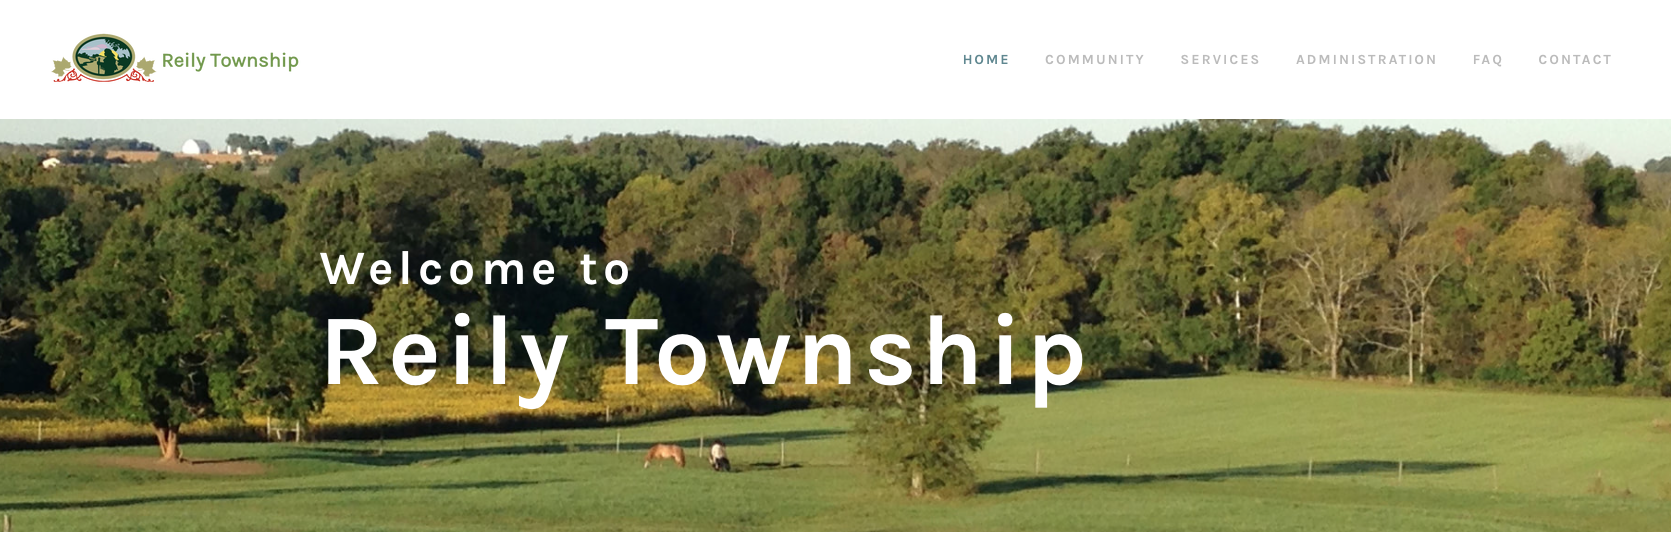 The Reily Township website homepage.